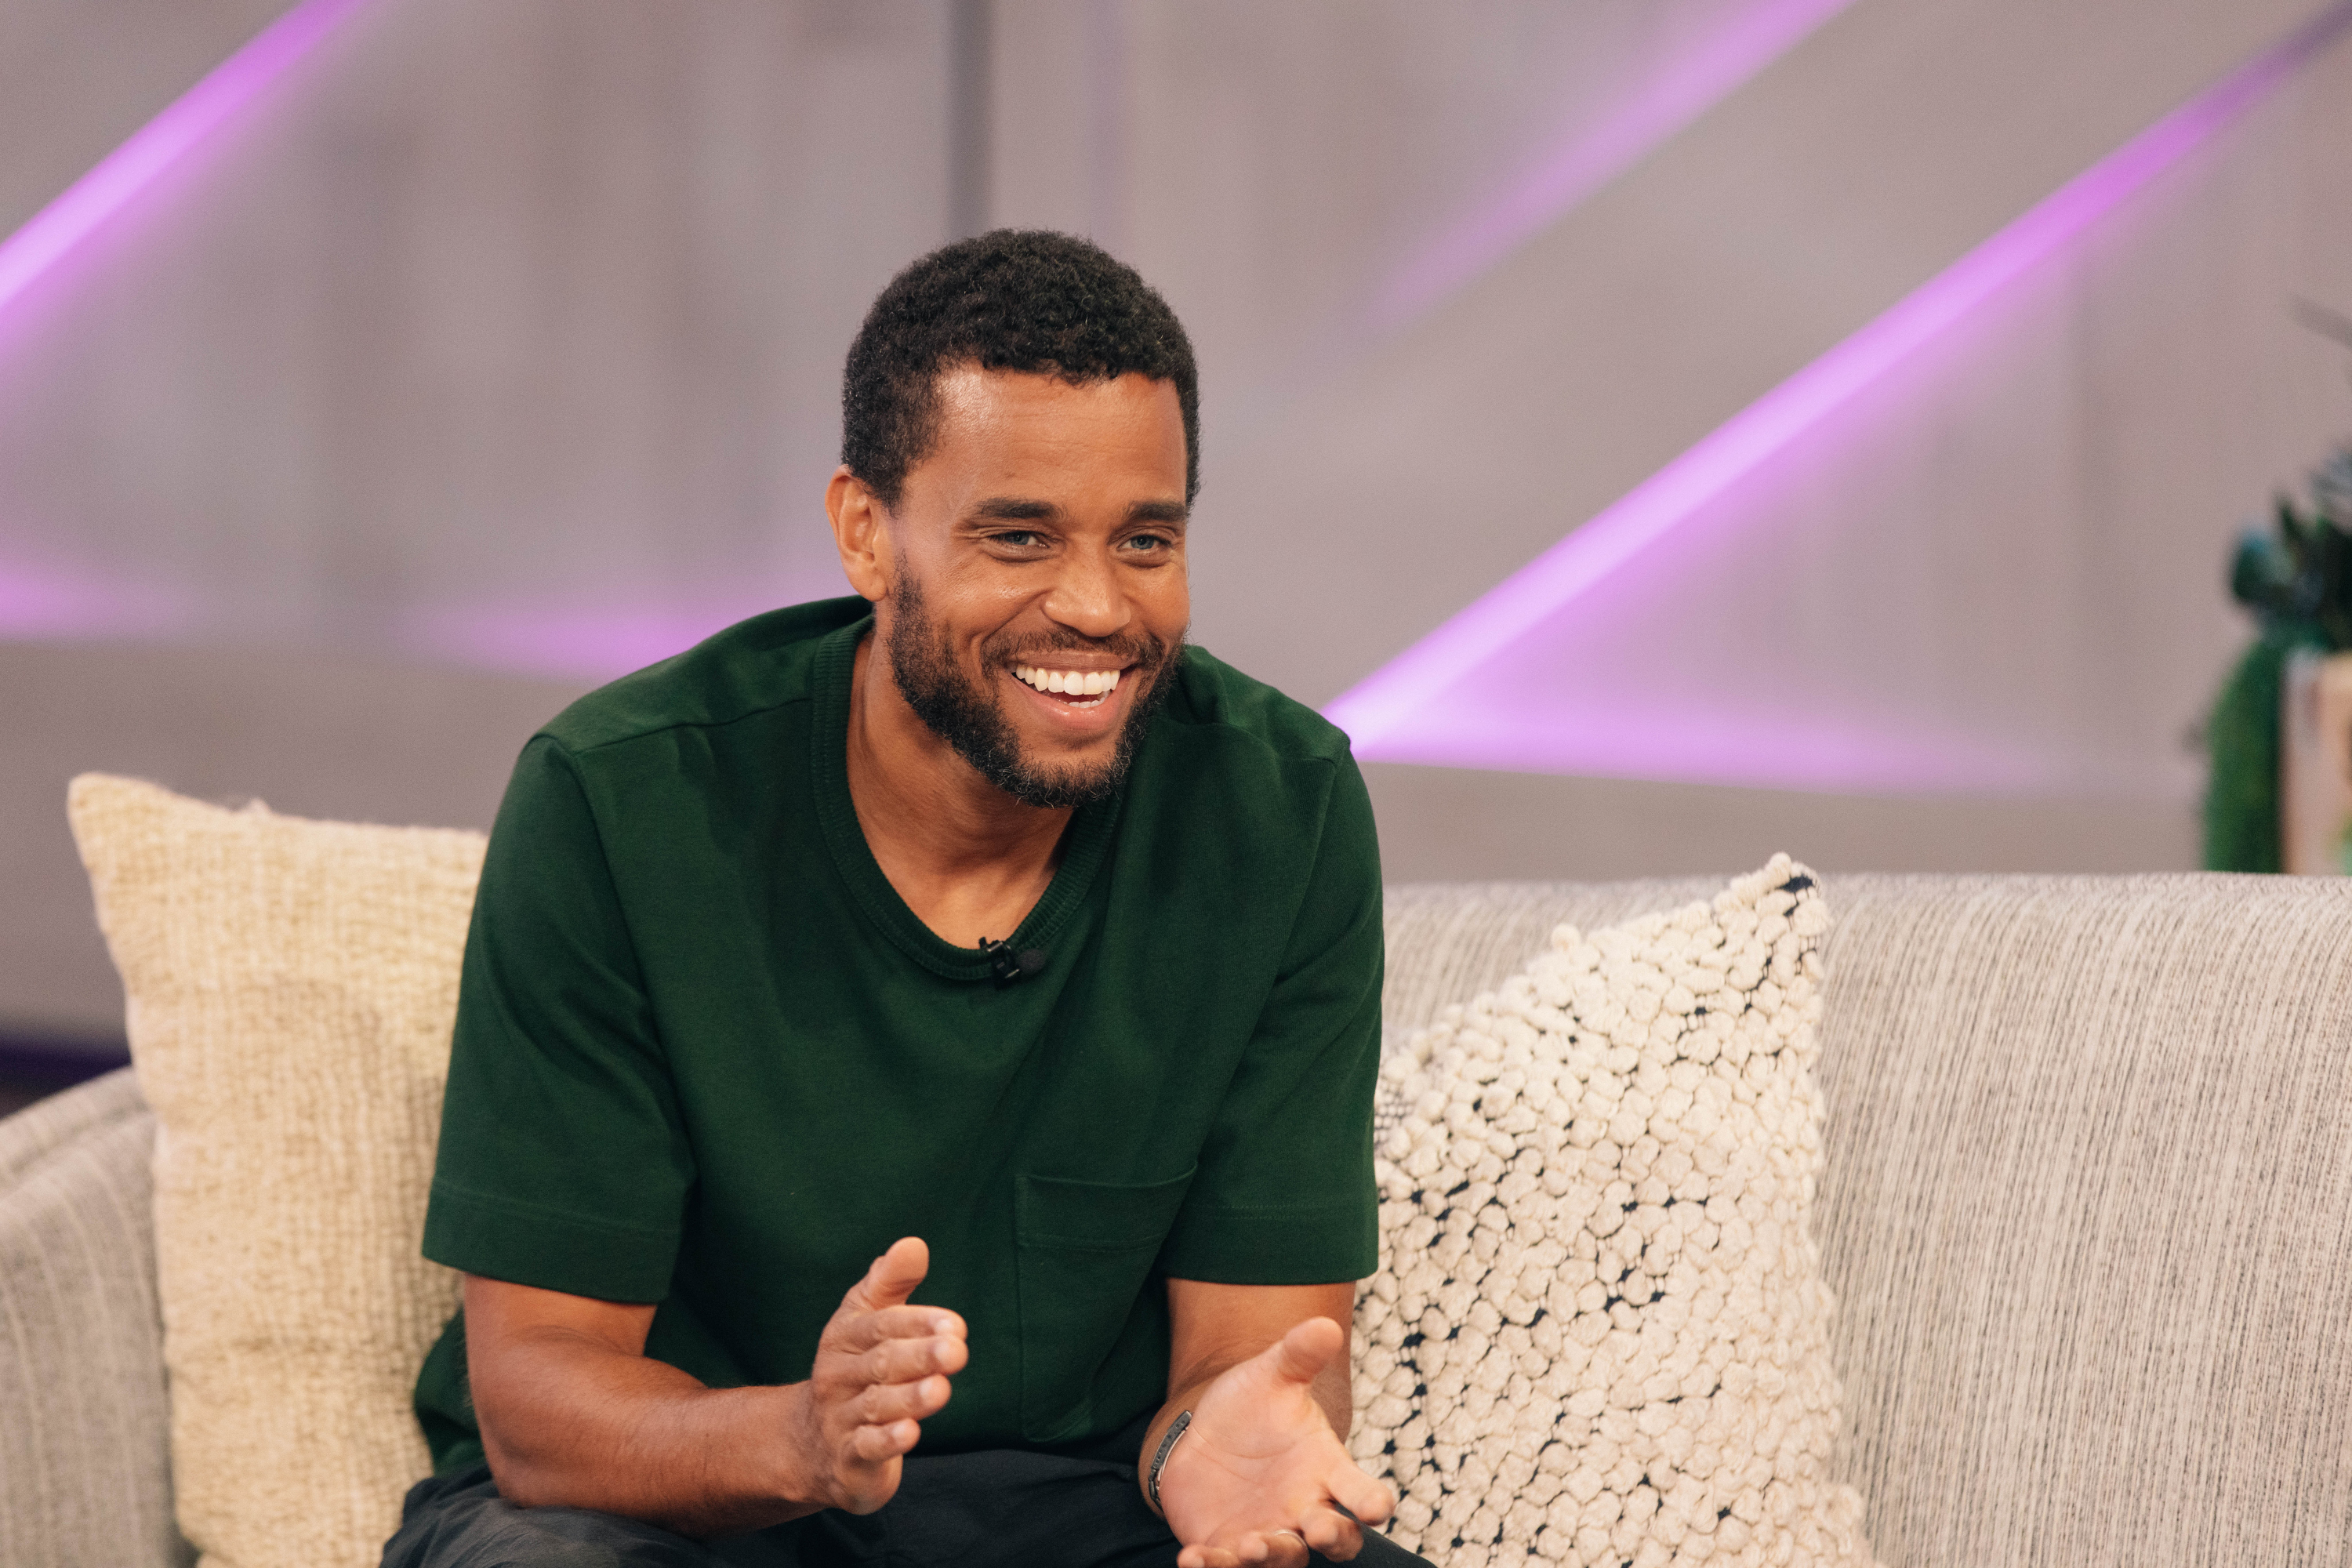 The life and career of Michael Ealy: A look at his ethnicity, family, TV shows, and movies